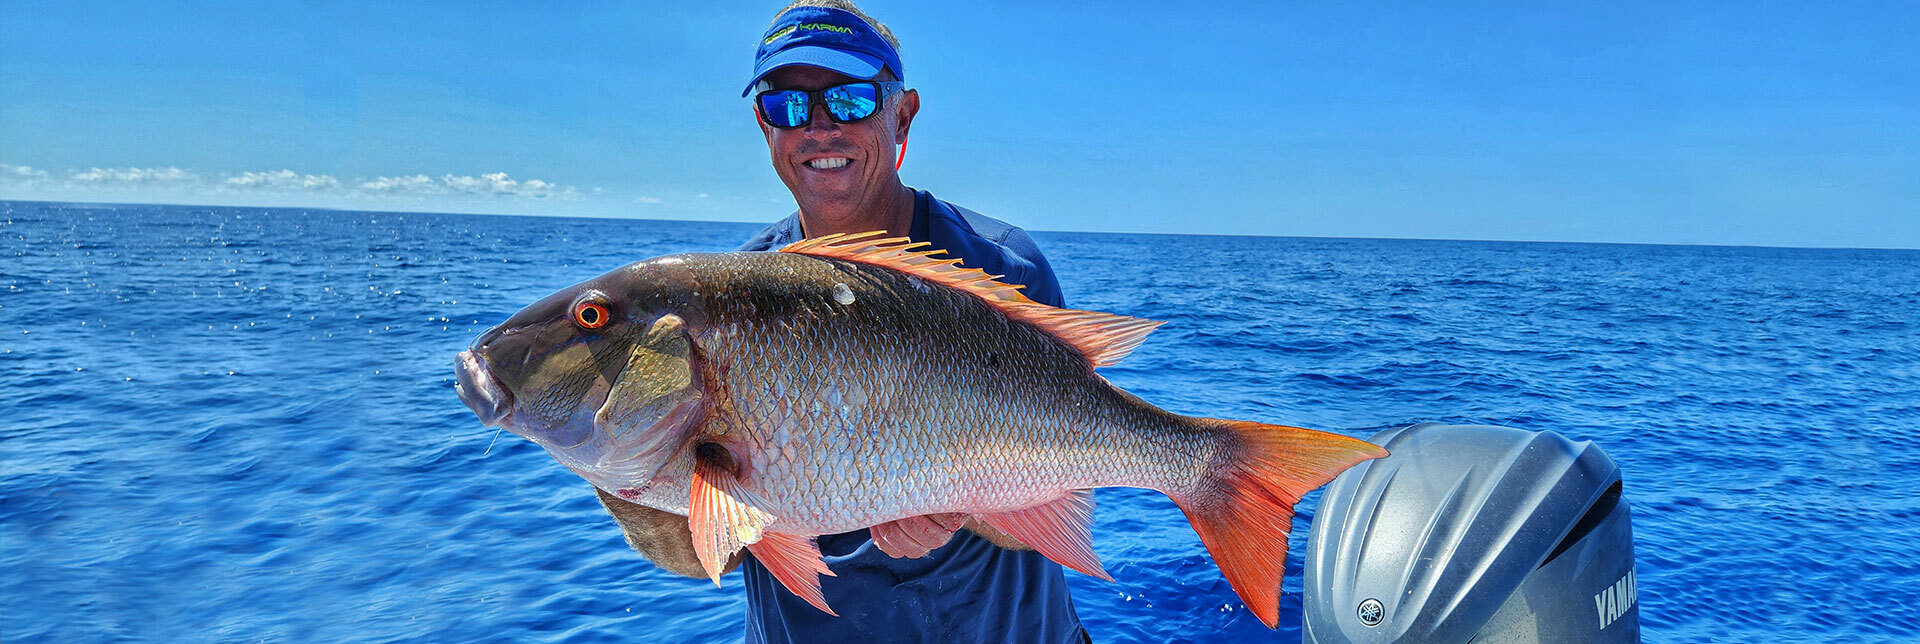 Mutton Snapper Fishing, In the Spread Home Slider